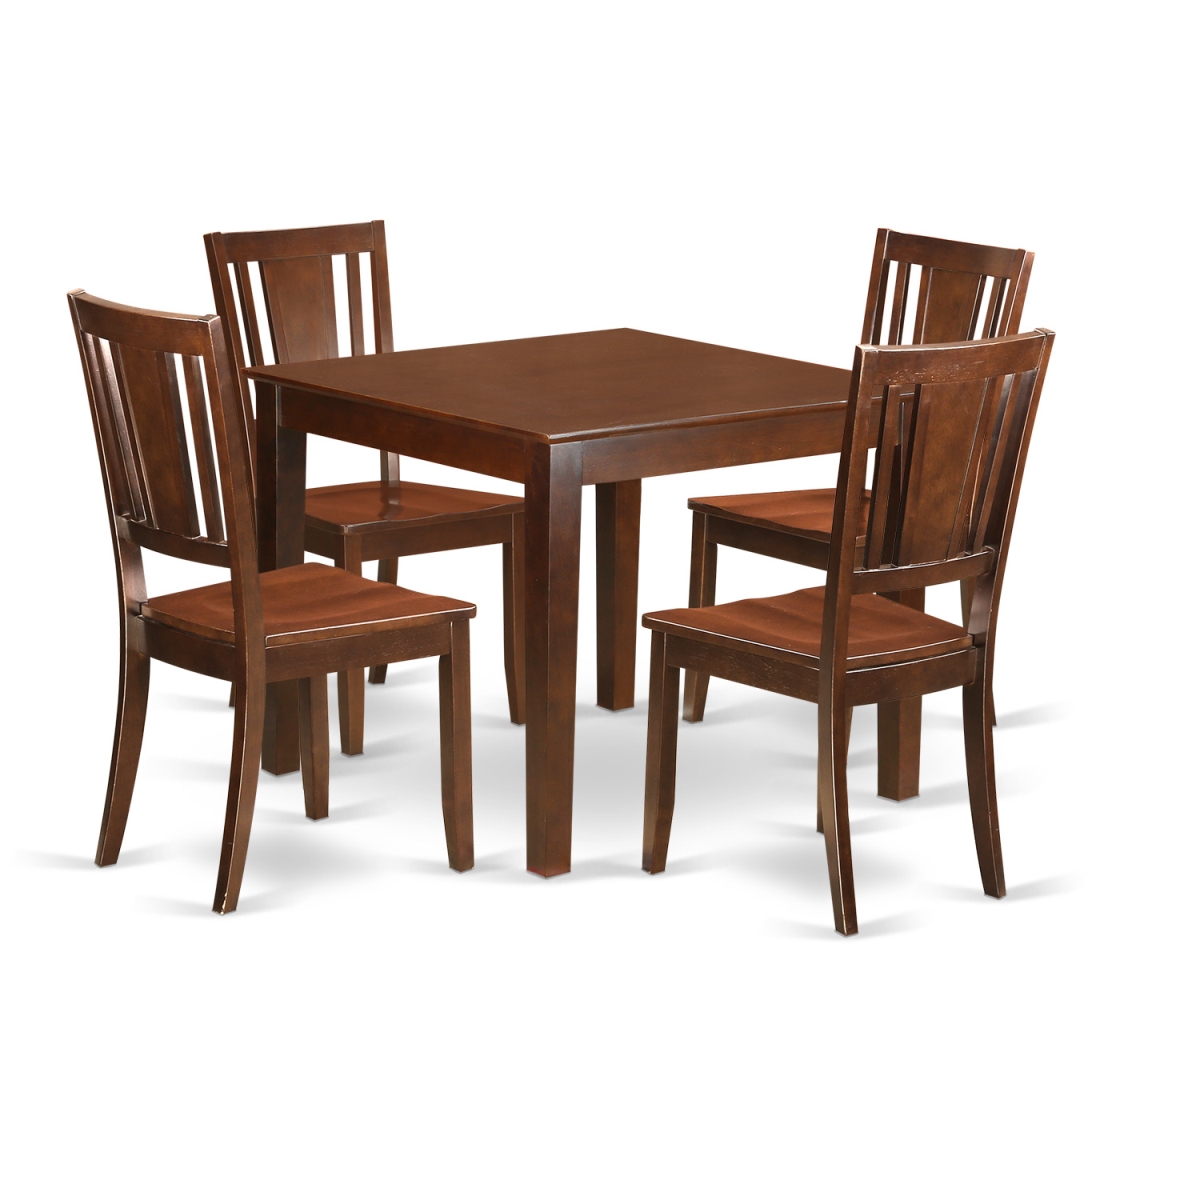 Picture of East West Furniture OXDU5-MAH-W Kitchen Tables & Chair Set with One Oxford Dining Room Table & 4 Chairs&#44; Mahogany - 5 Piece